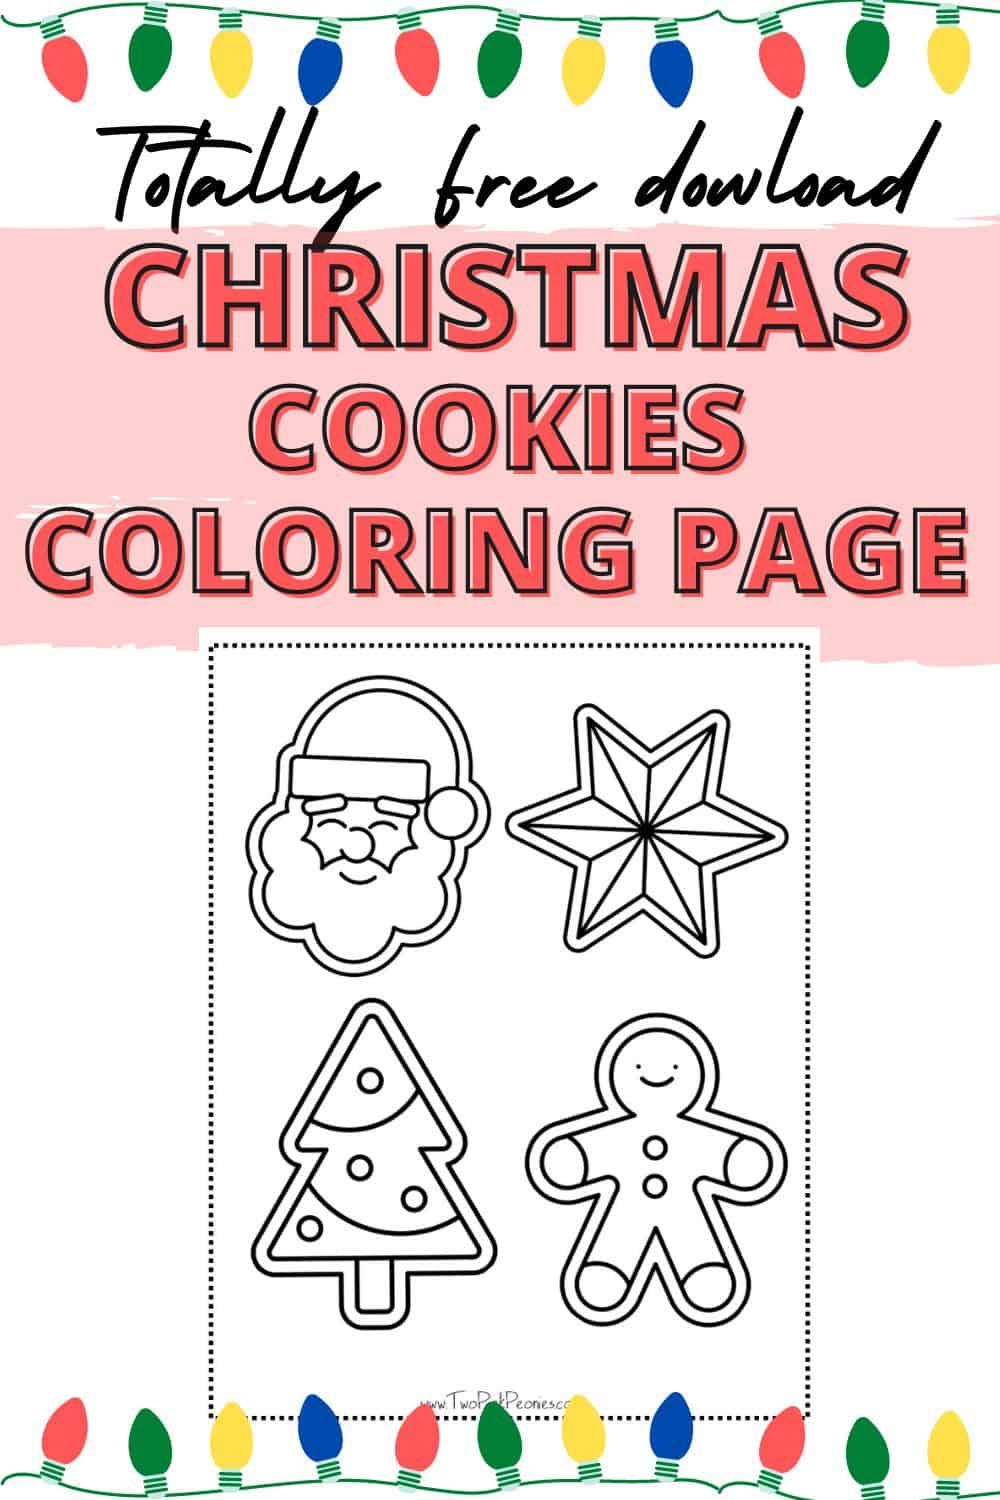 Christmas cookies coloring page totally free instant download